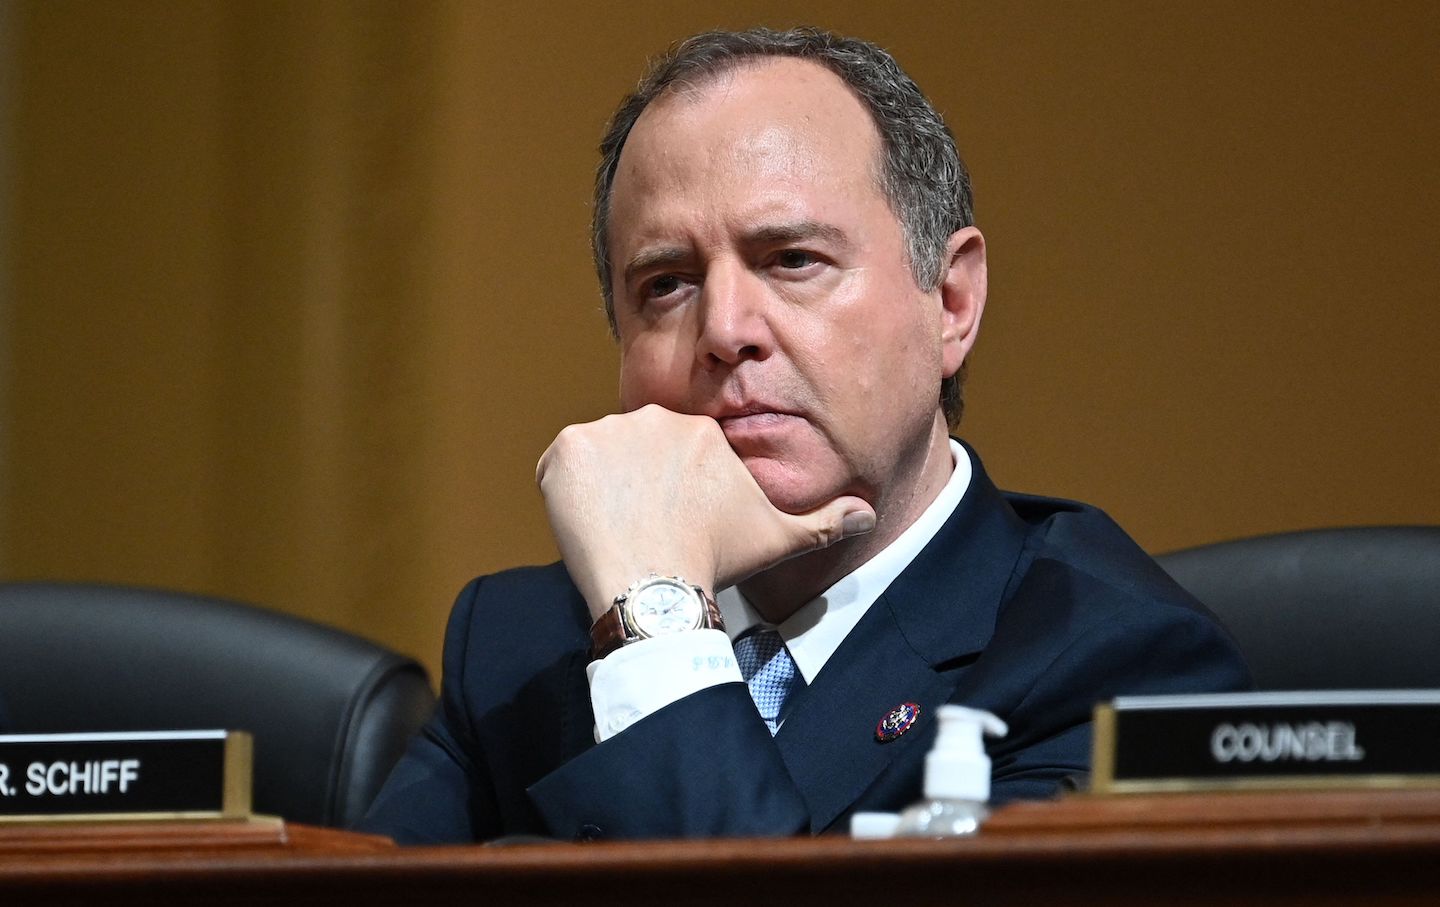 Adam Schiff Weighs In on What Trump May Do Next